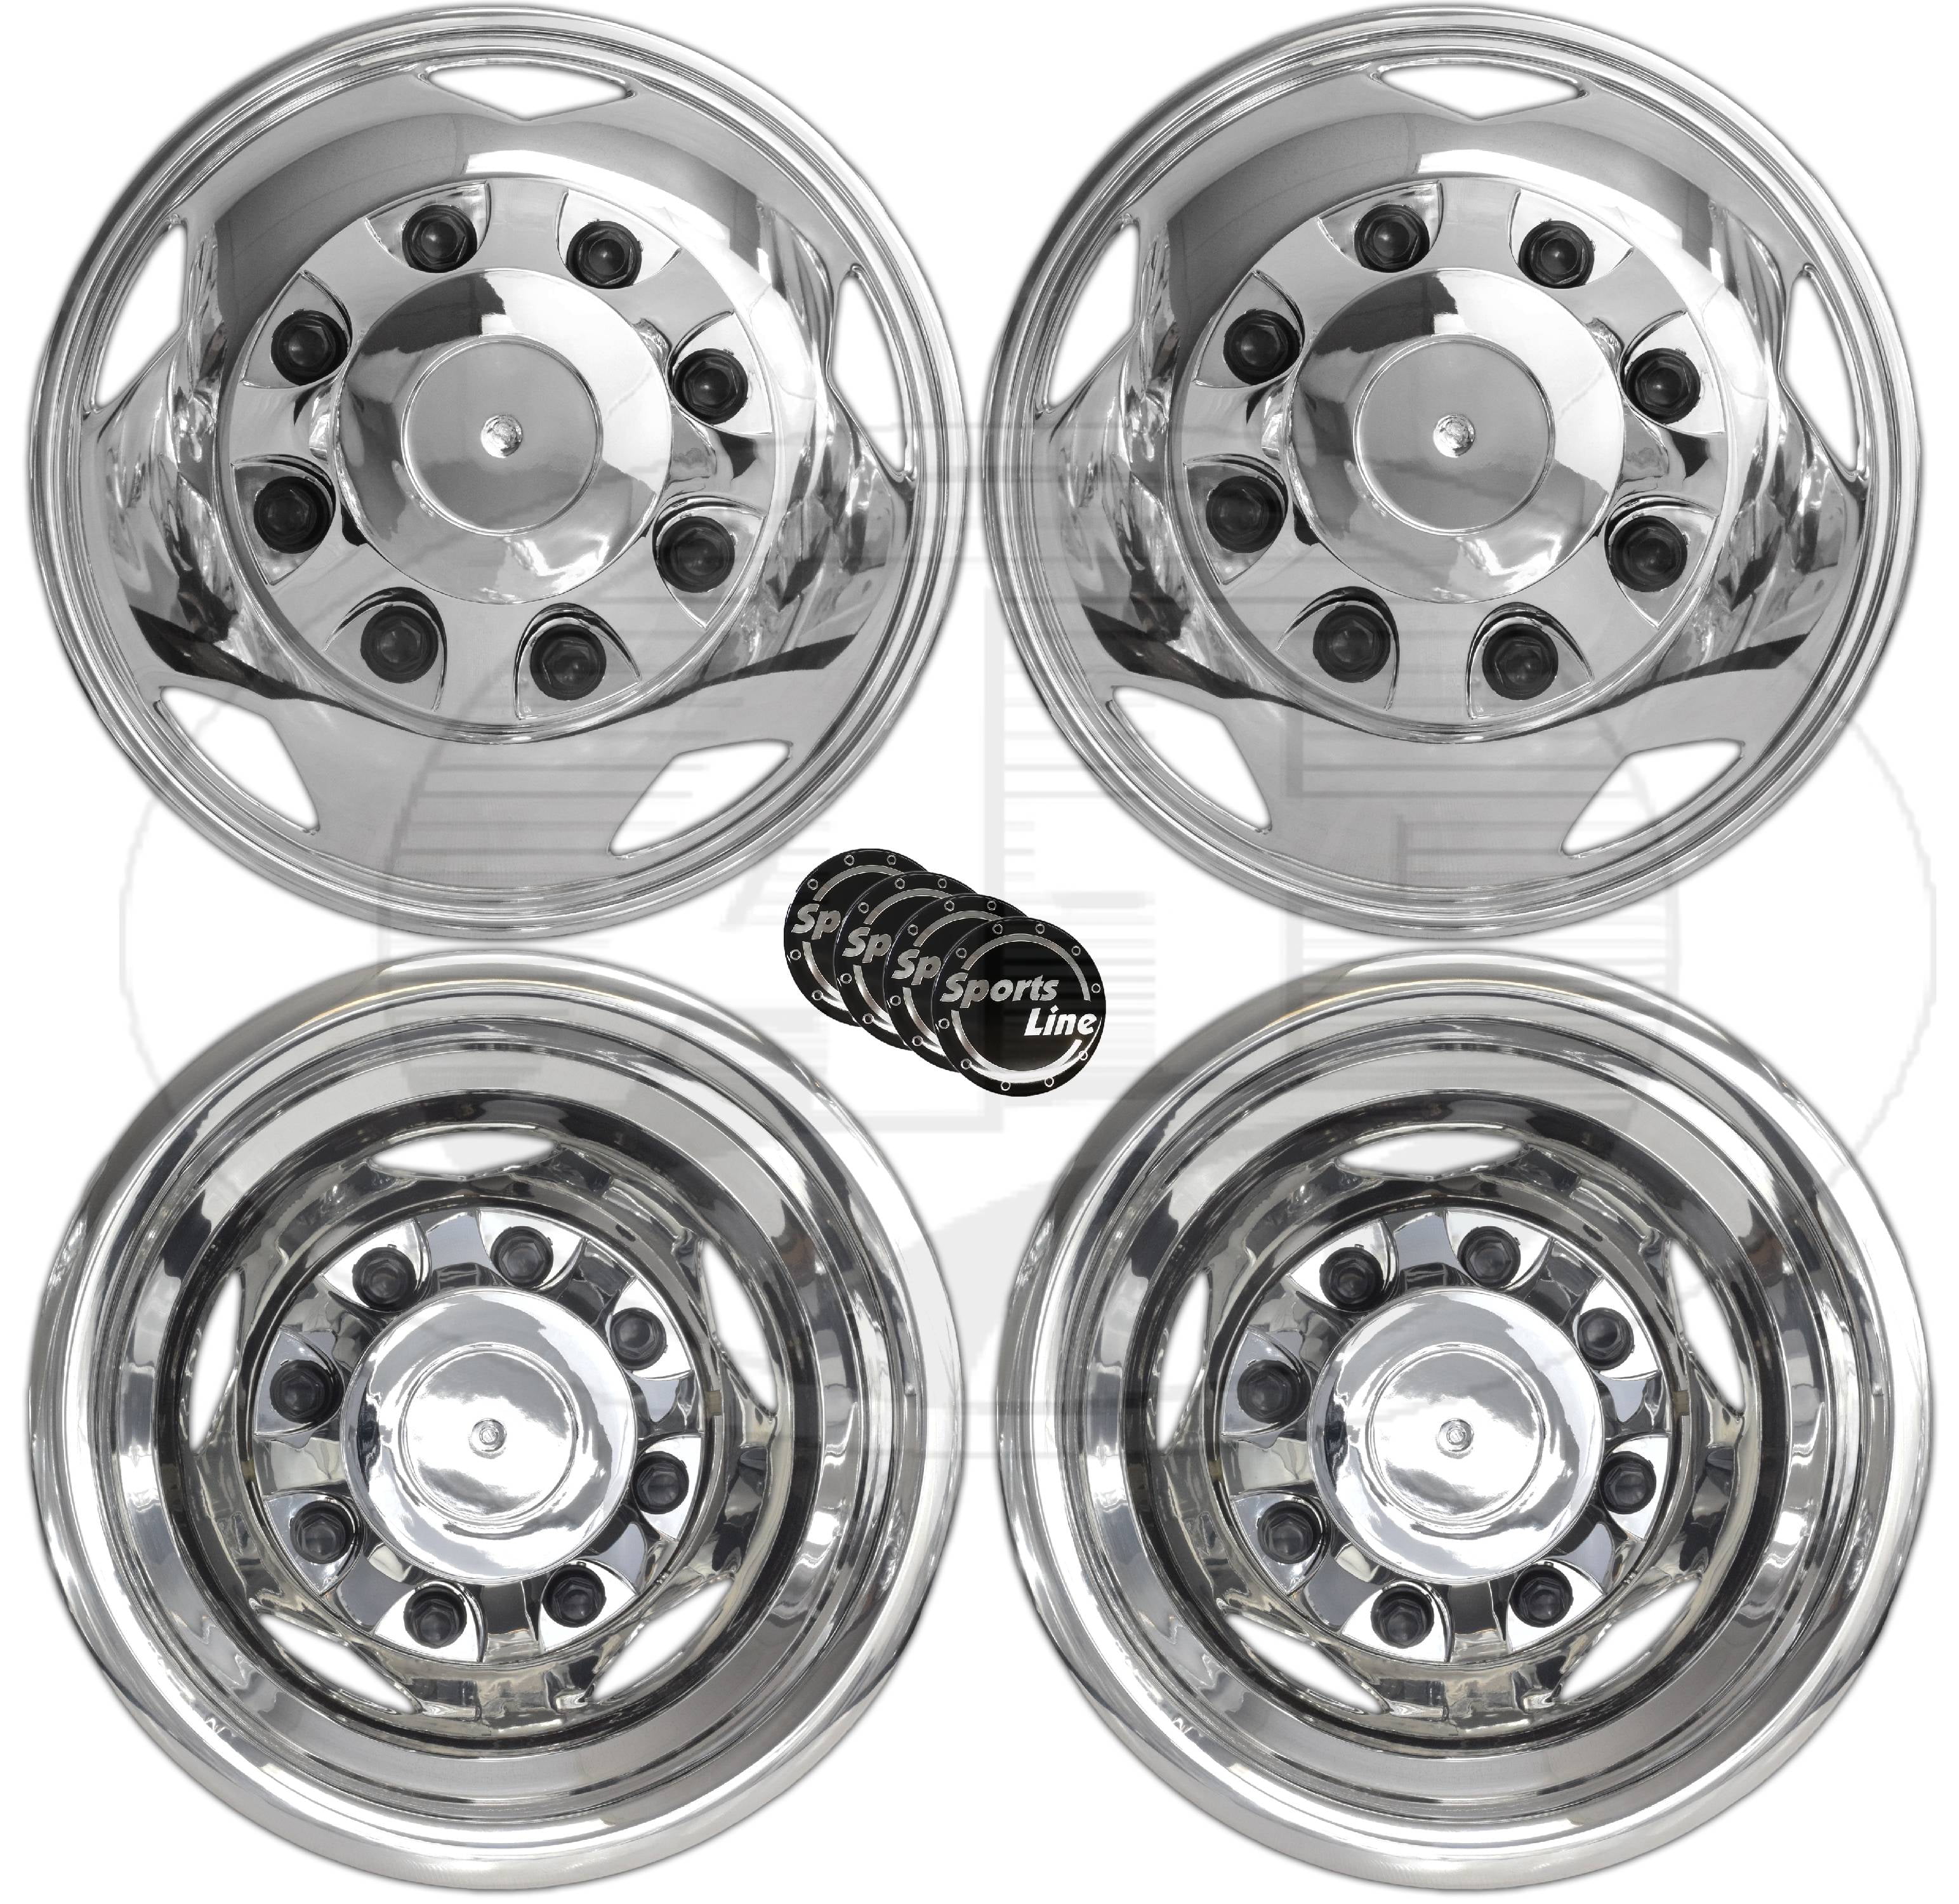 OEM Factory Replacement RV Trailer Van Stainless Alloy Wheels 4pc Full Set of 16 Wheel Simulators for 8 Lug 4 Hole for Dually Trucks Universal Fit Easy Snap On 